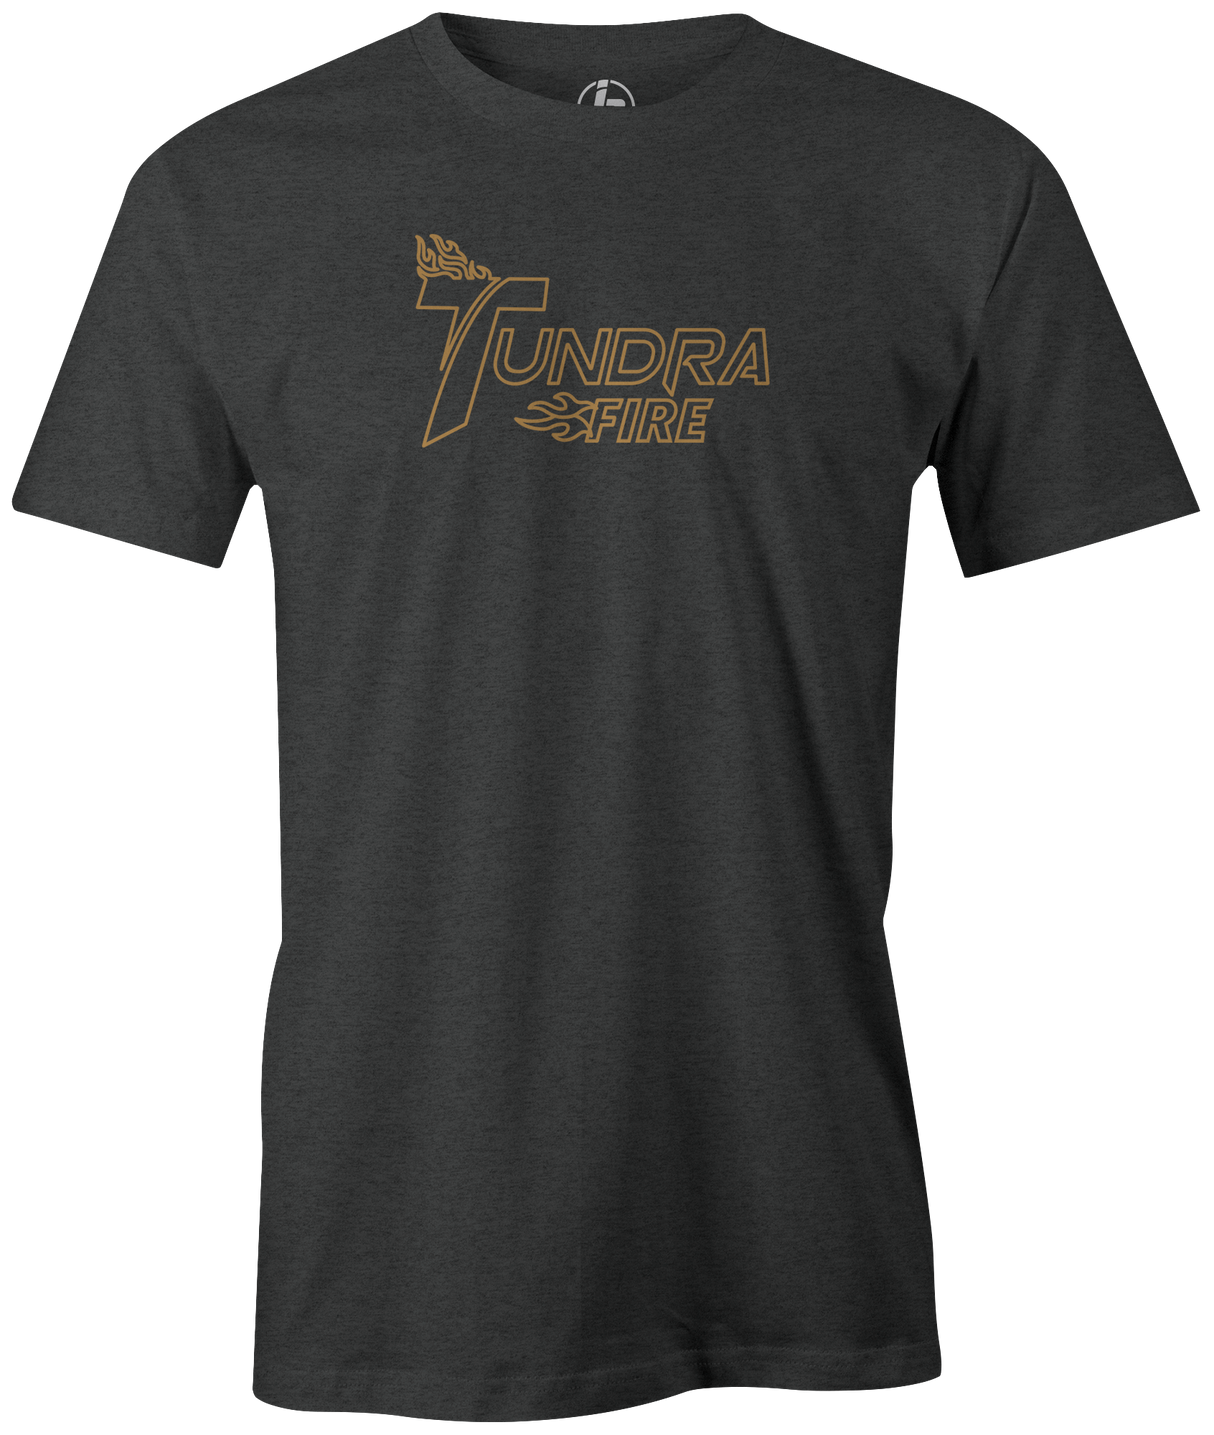 The Track Tundra Fire nameplate is one of the most famous in Track's history. The Track Tundra Fire bowling ball is back and better than ever. Celebrate the re-launch with this tee shirt. Tshirt, tee, tee-shirt, tee shirt, Pro shop. League bowling team shirt. PBA. PWBA. USBC. Junior Gold. Youth bowling. Tournament t-shirt. Men's. Track bowling. bowling. bowling ball. 